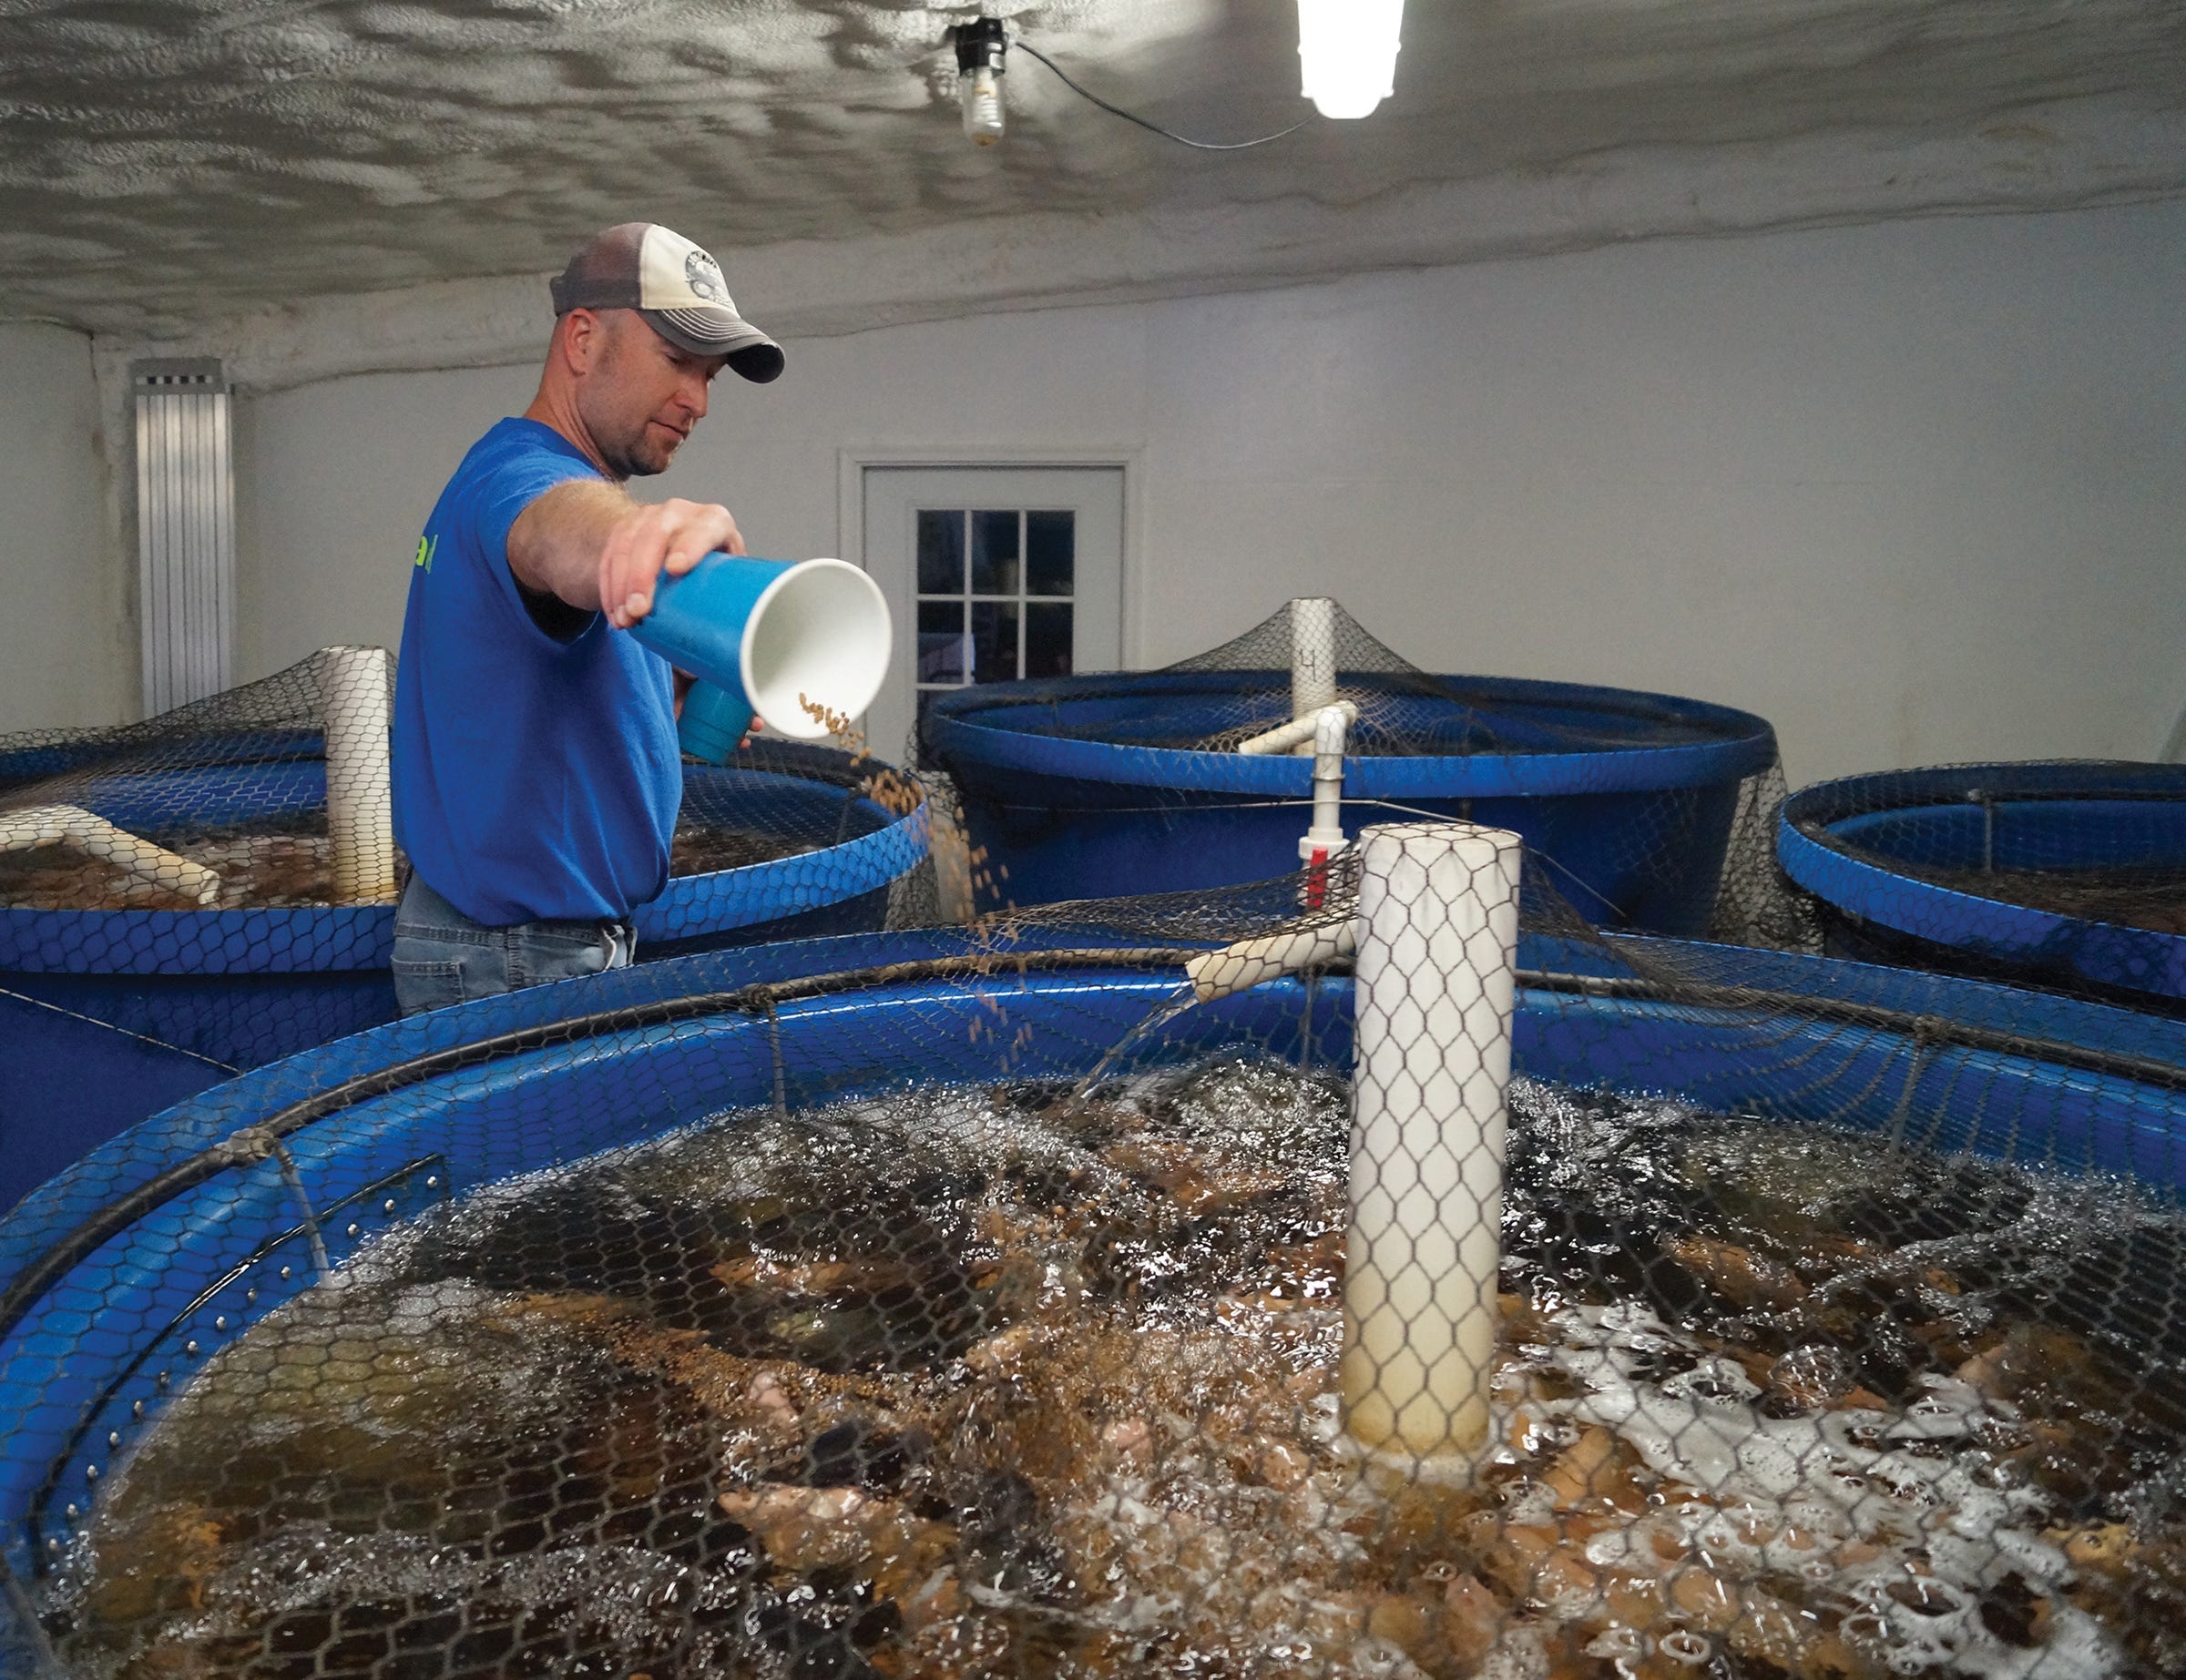 Tilapia swim in tanks where the heifers used to stand in Nate Calkins' former milking barn.